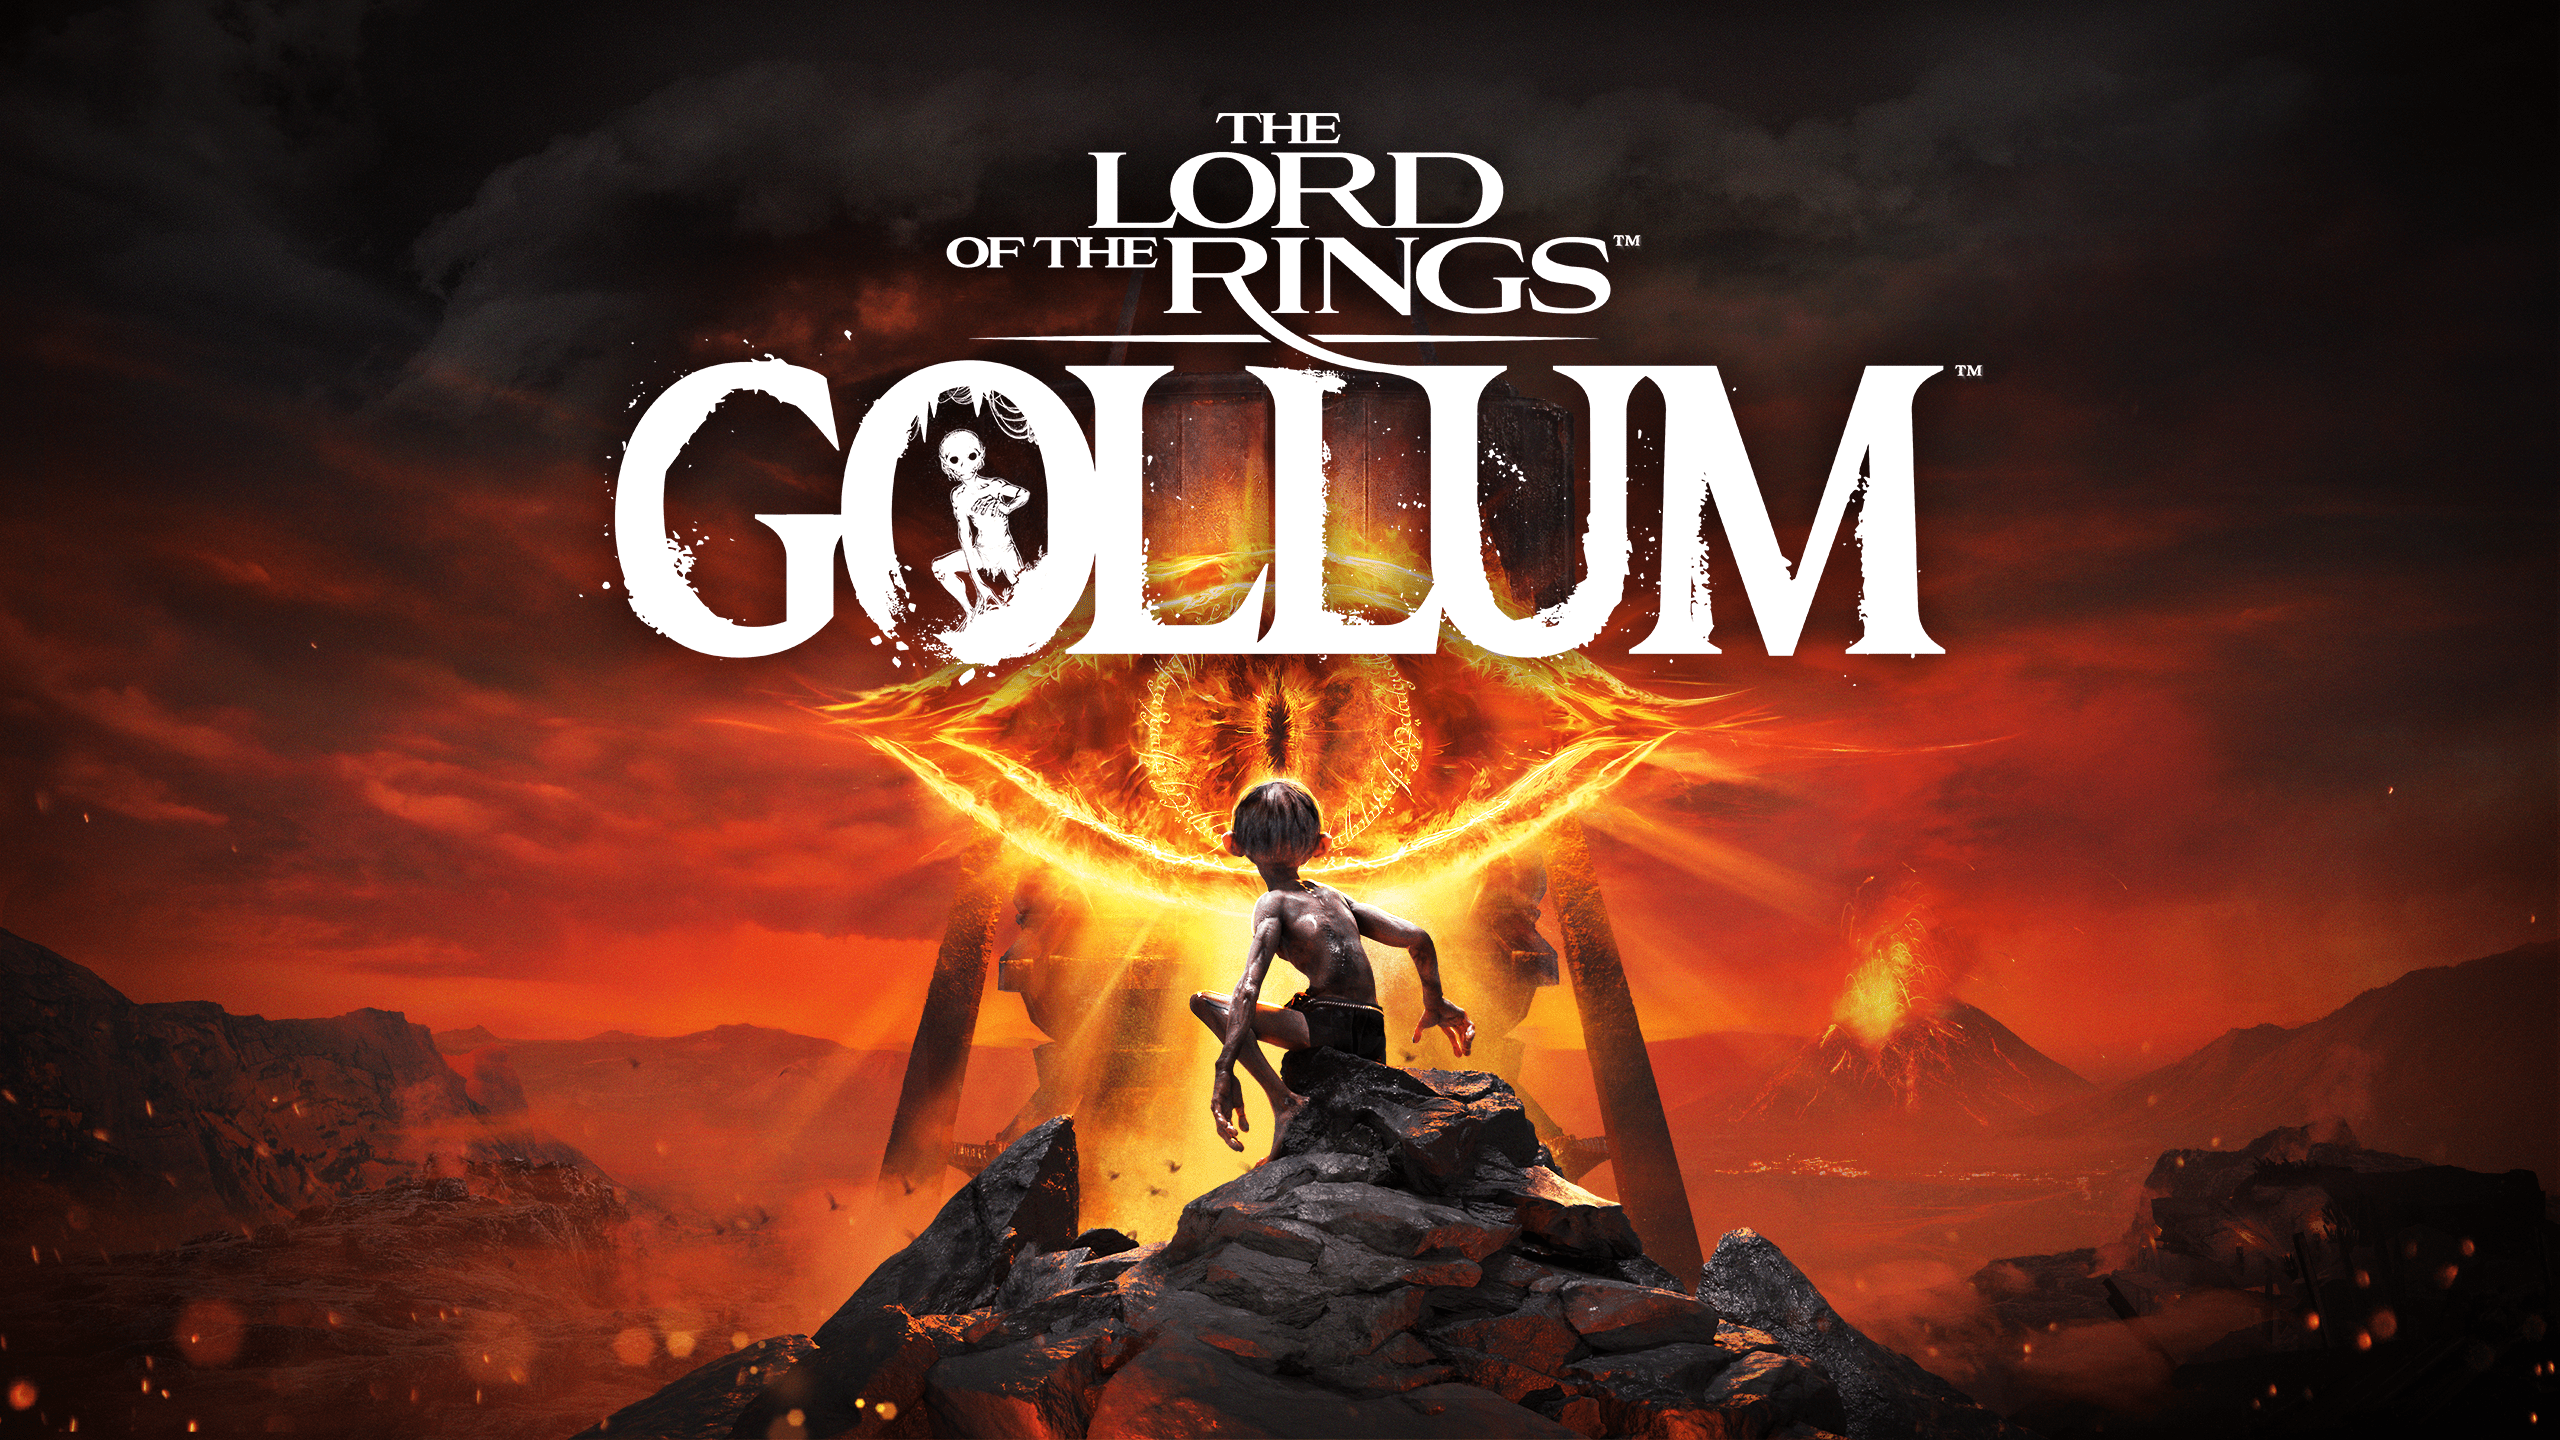 The Lord of the Rings: Gollum - One Ring to Rule Them All: A Preview of the Upcoming LOTR Game